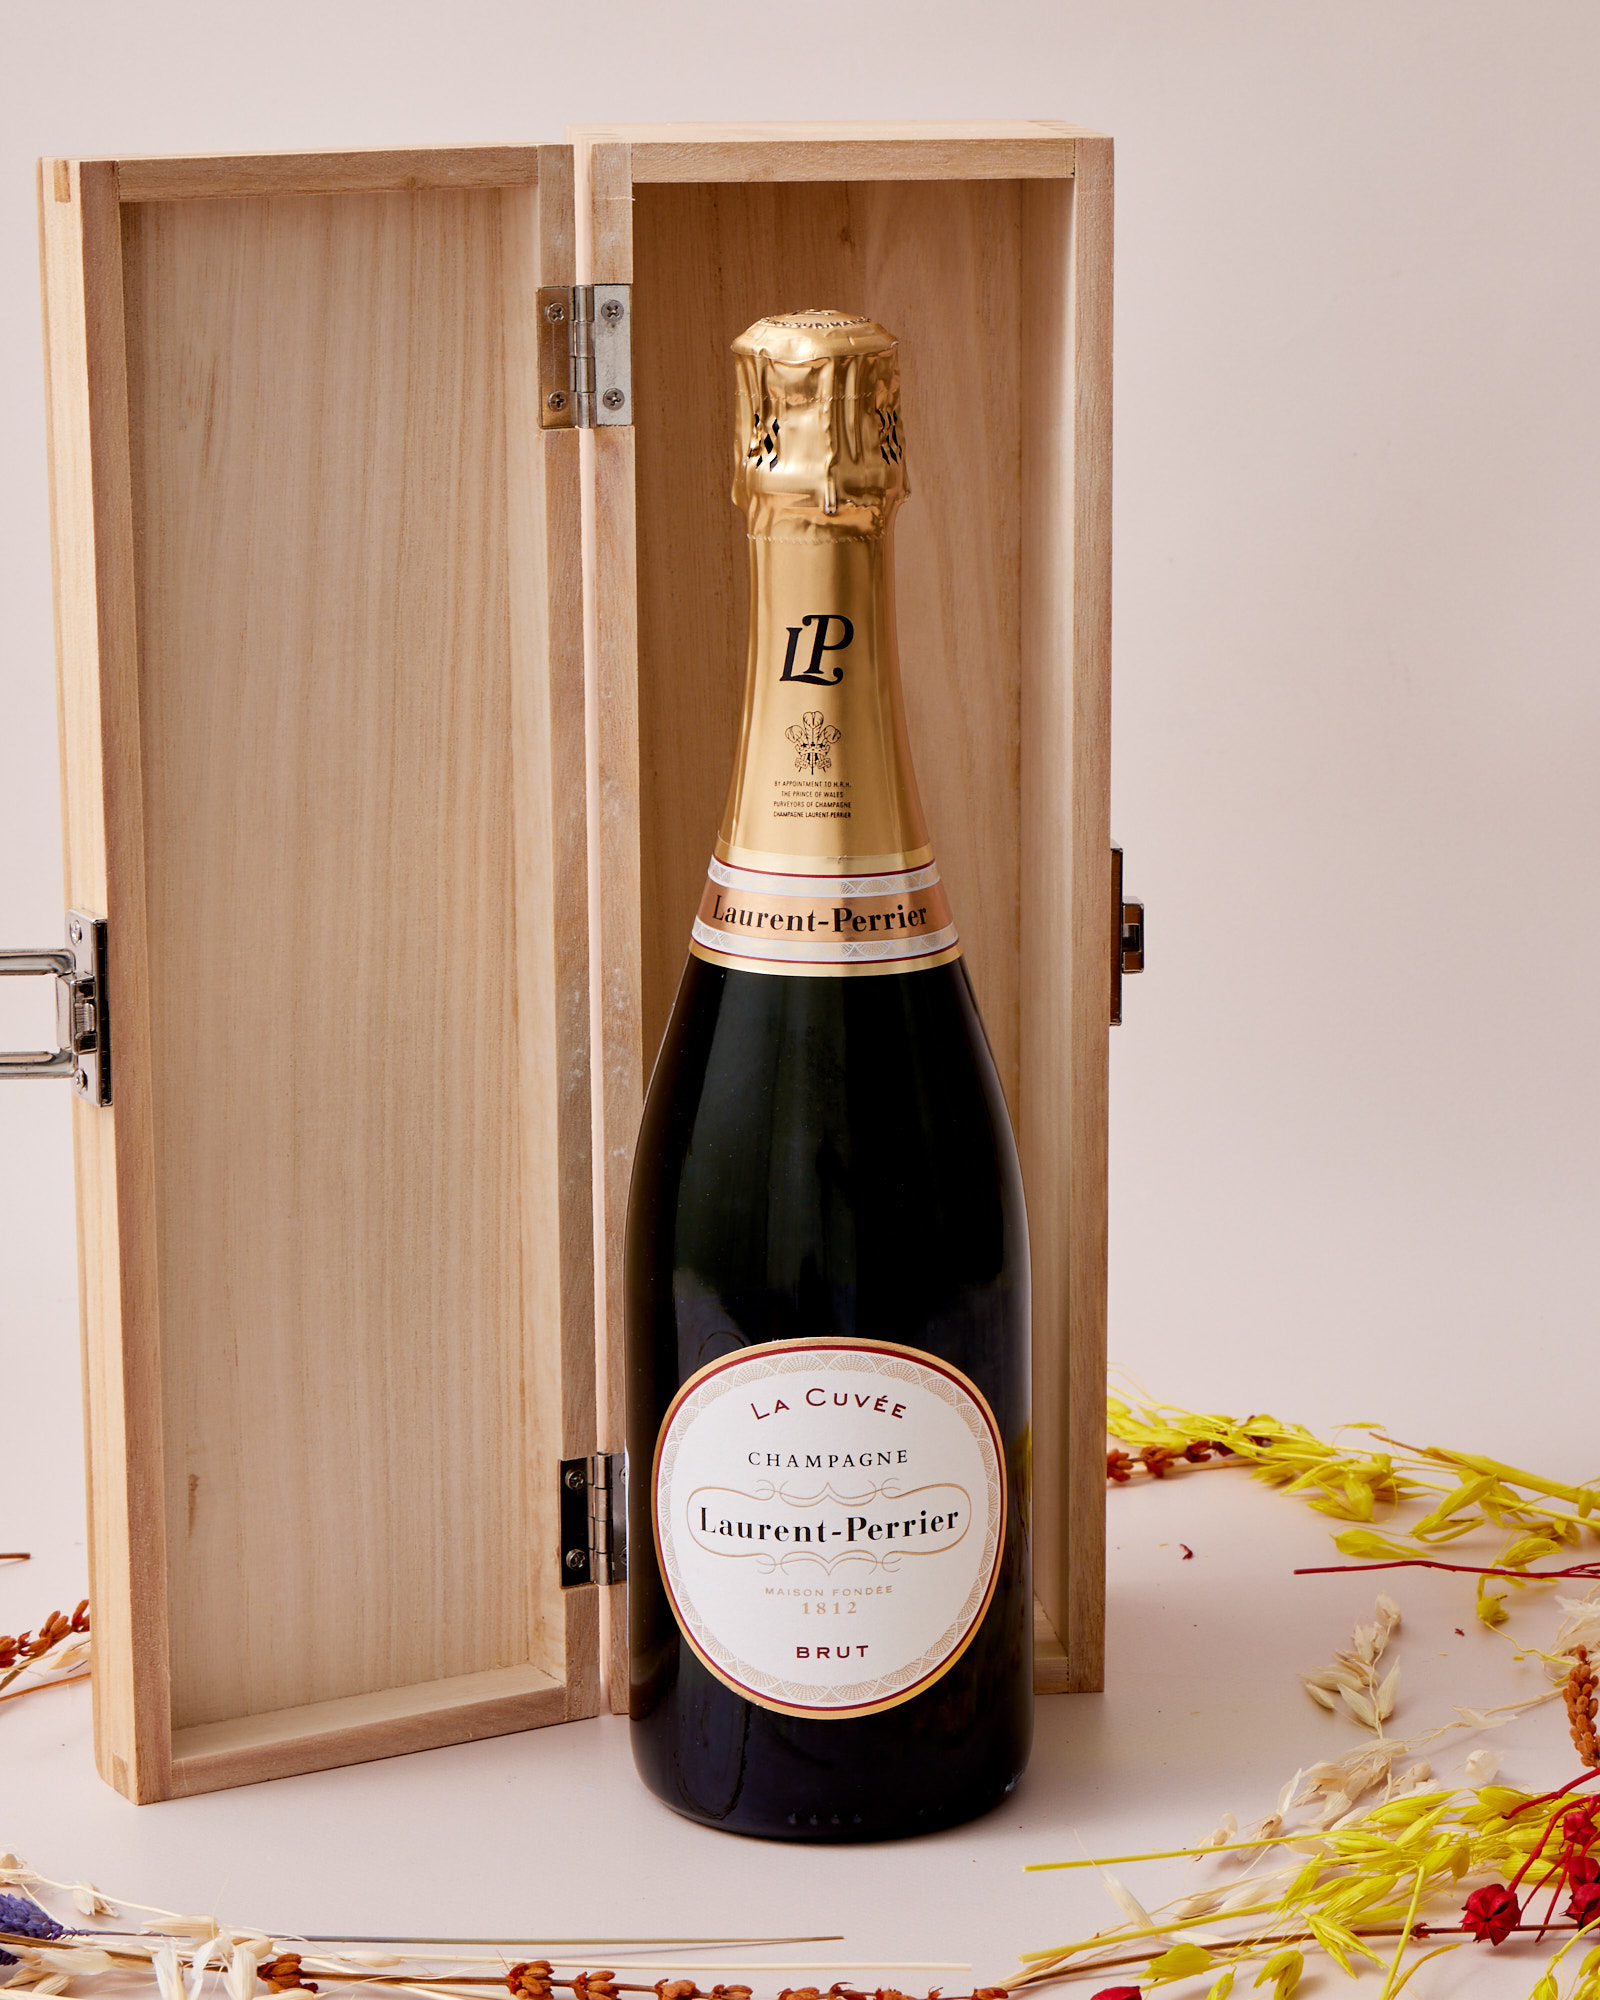 Engraved Wooden Box With Laurent-Perrier Champagne - Bust Out The Bubbly